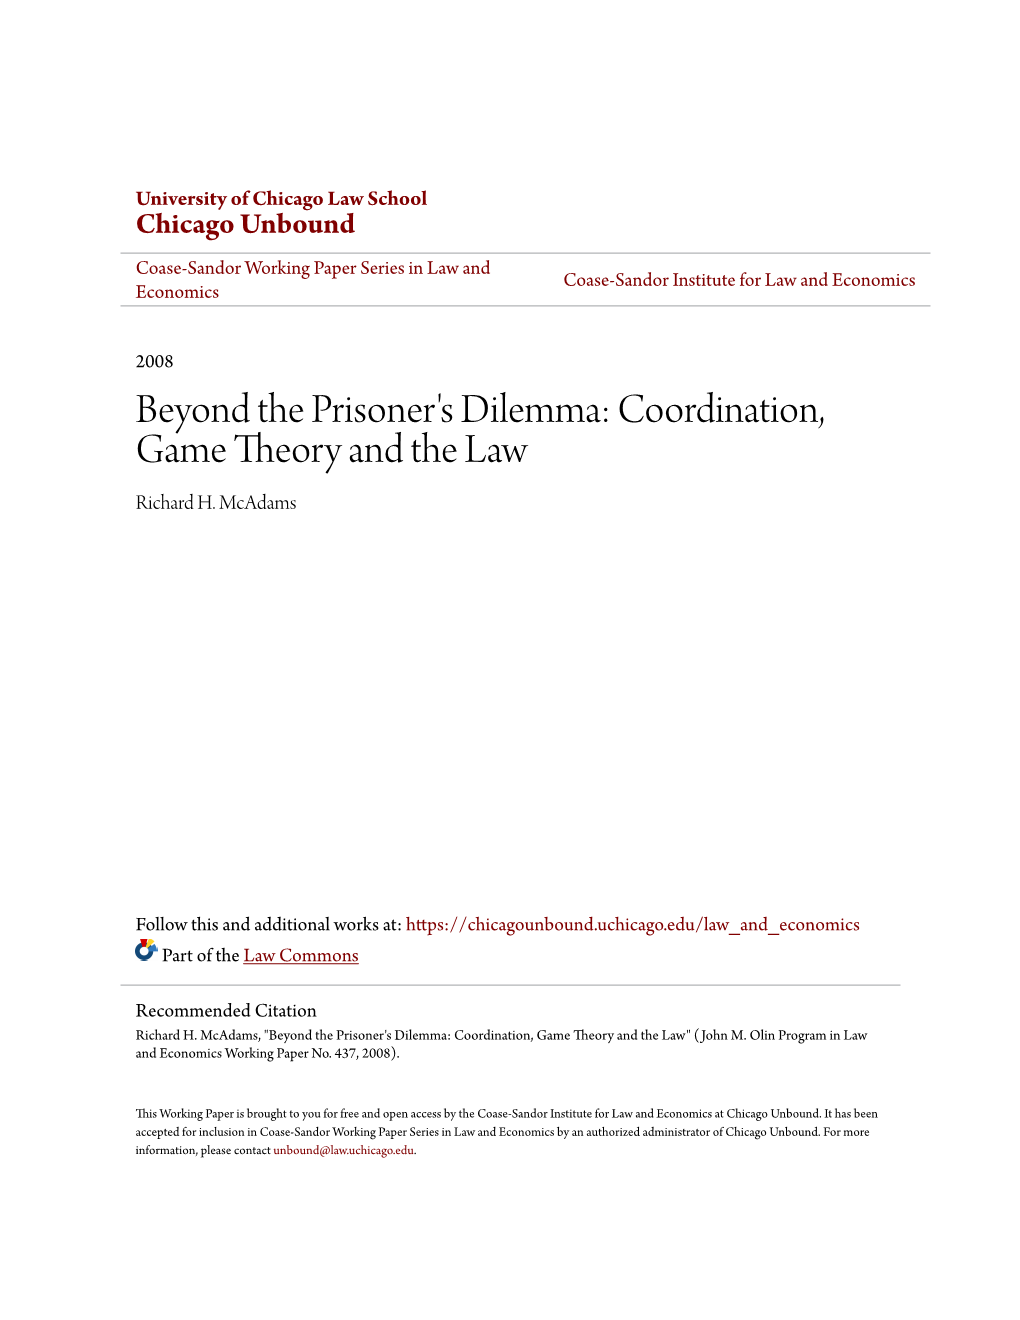 Beyond the Prisoner's Dilemma: Coordination, Game Theory and the Law Richard H